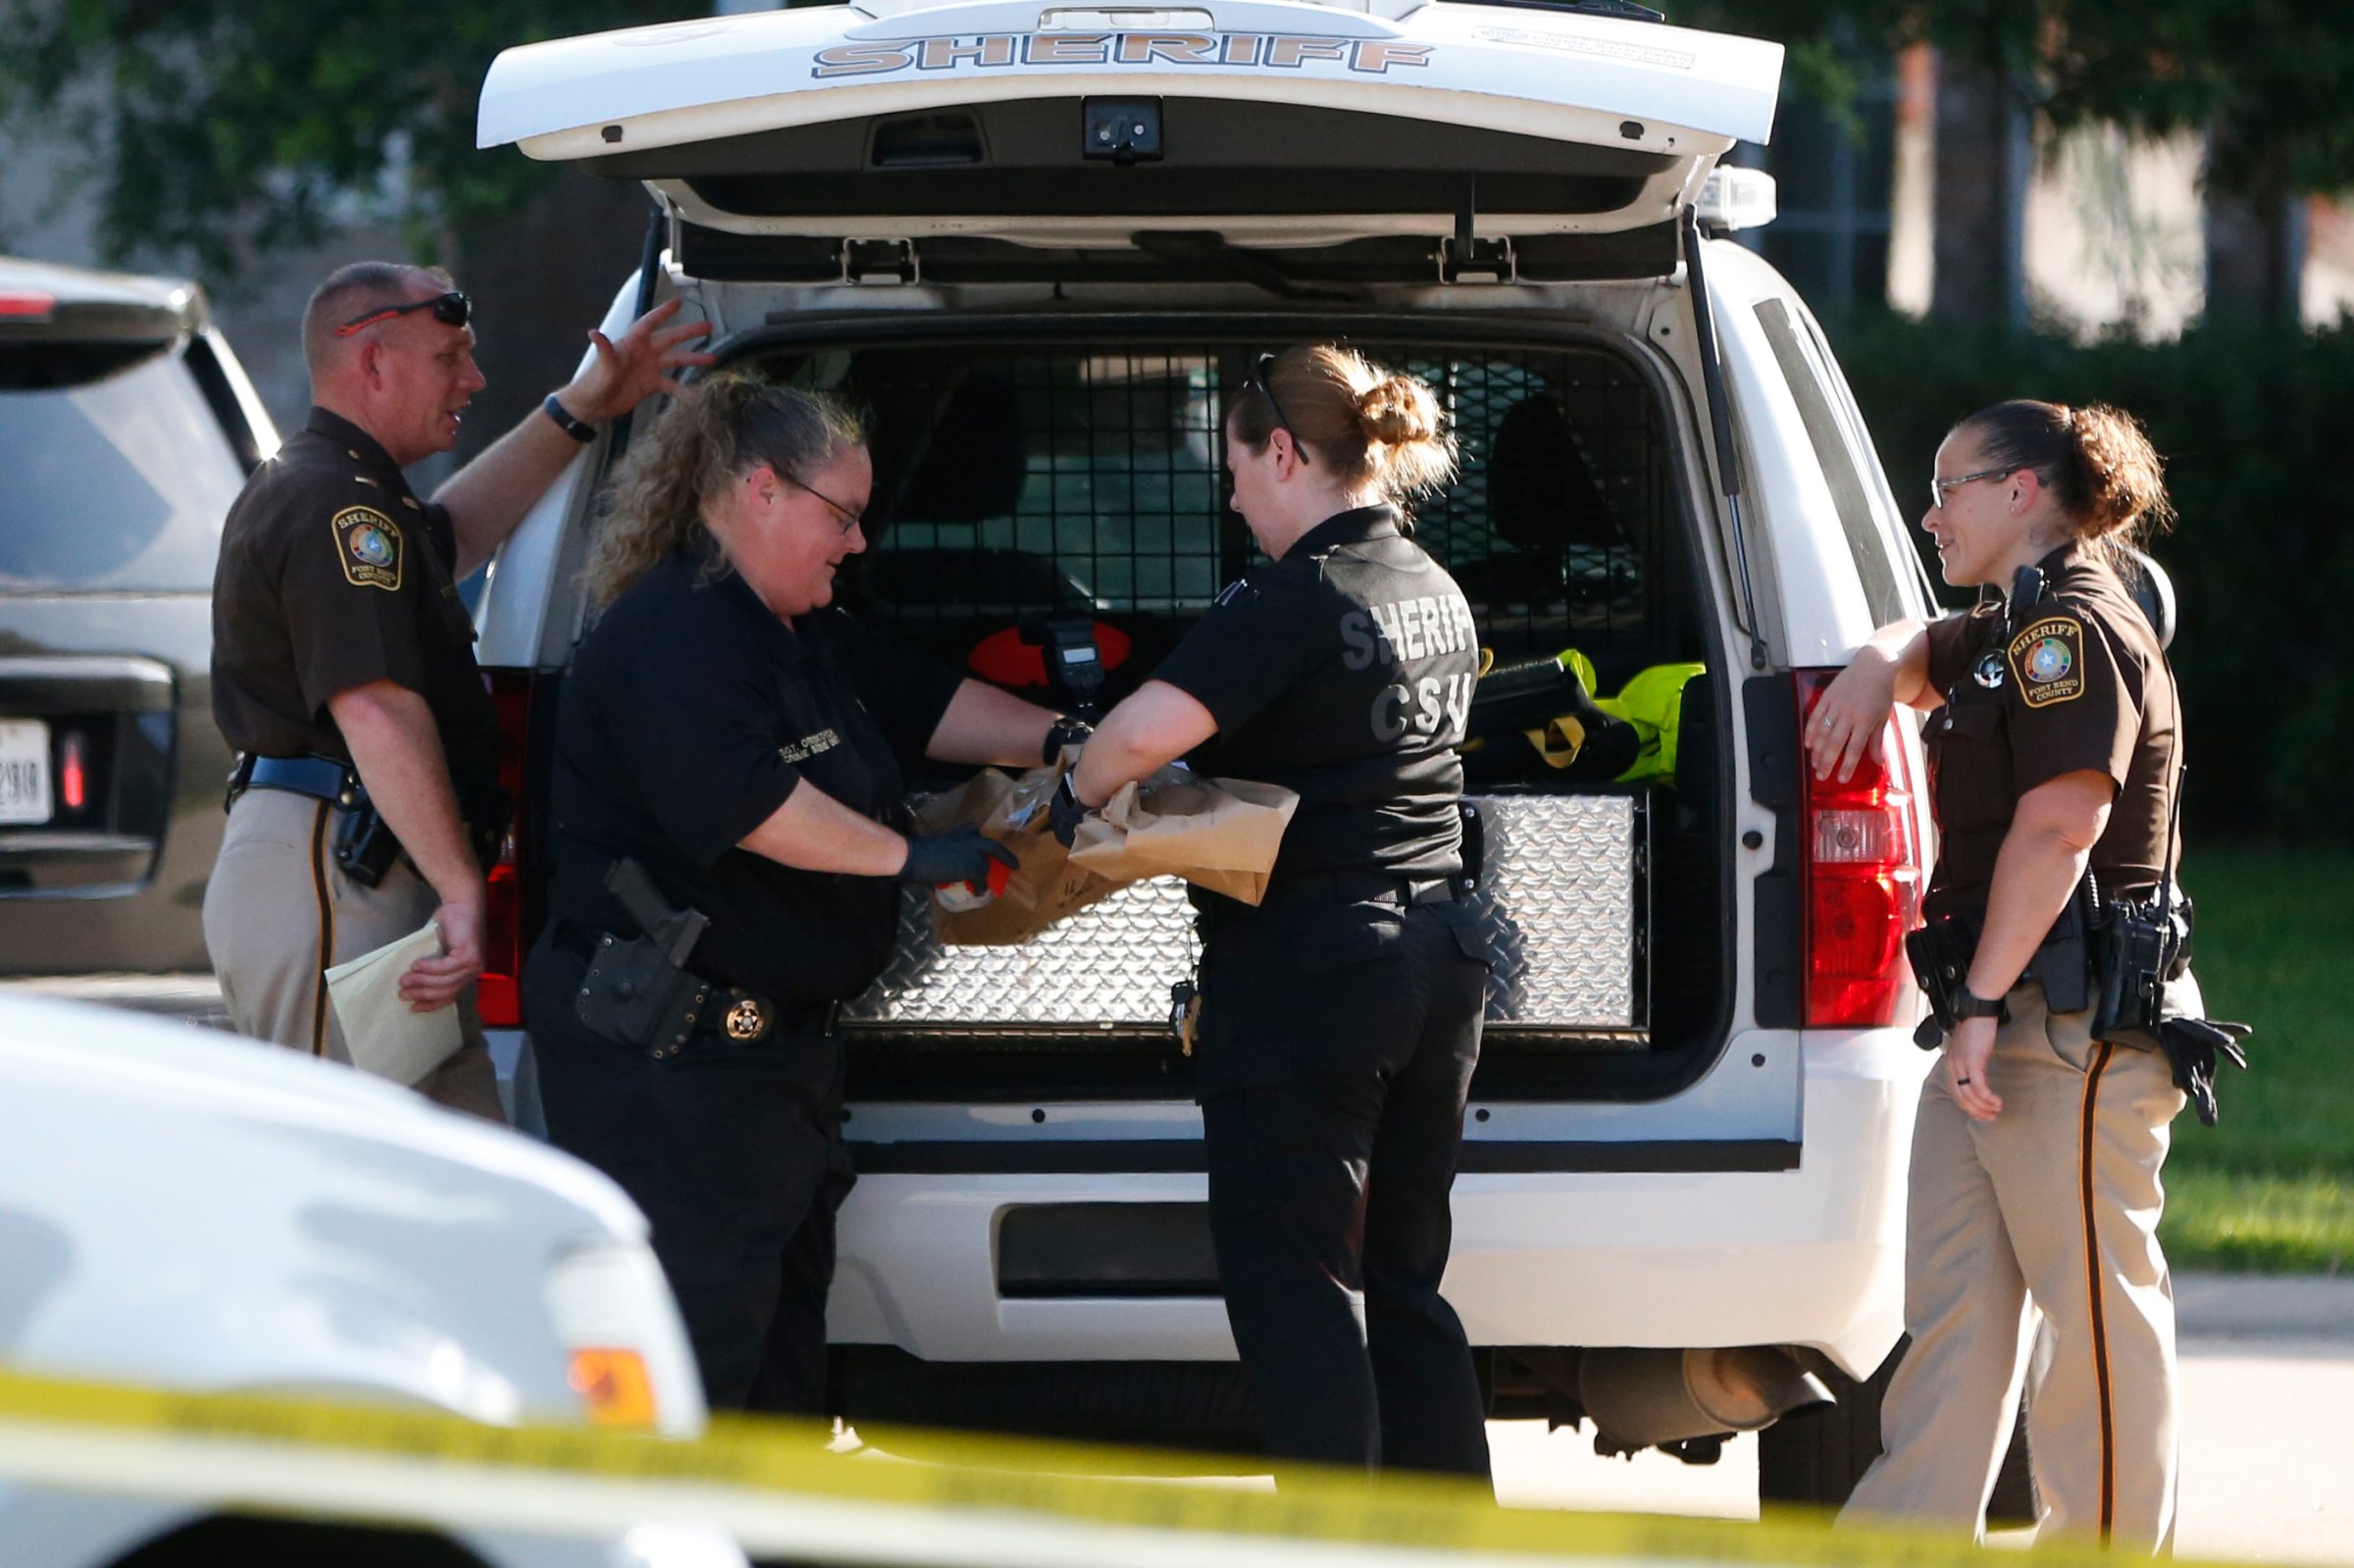 Fort Bend County Sheriffs department crime scene members bag a gun for evidence in a shooting at Blanchard Grove and Remson Hollow in Katy, Texas on June 24, 2016.